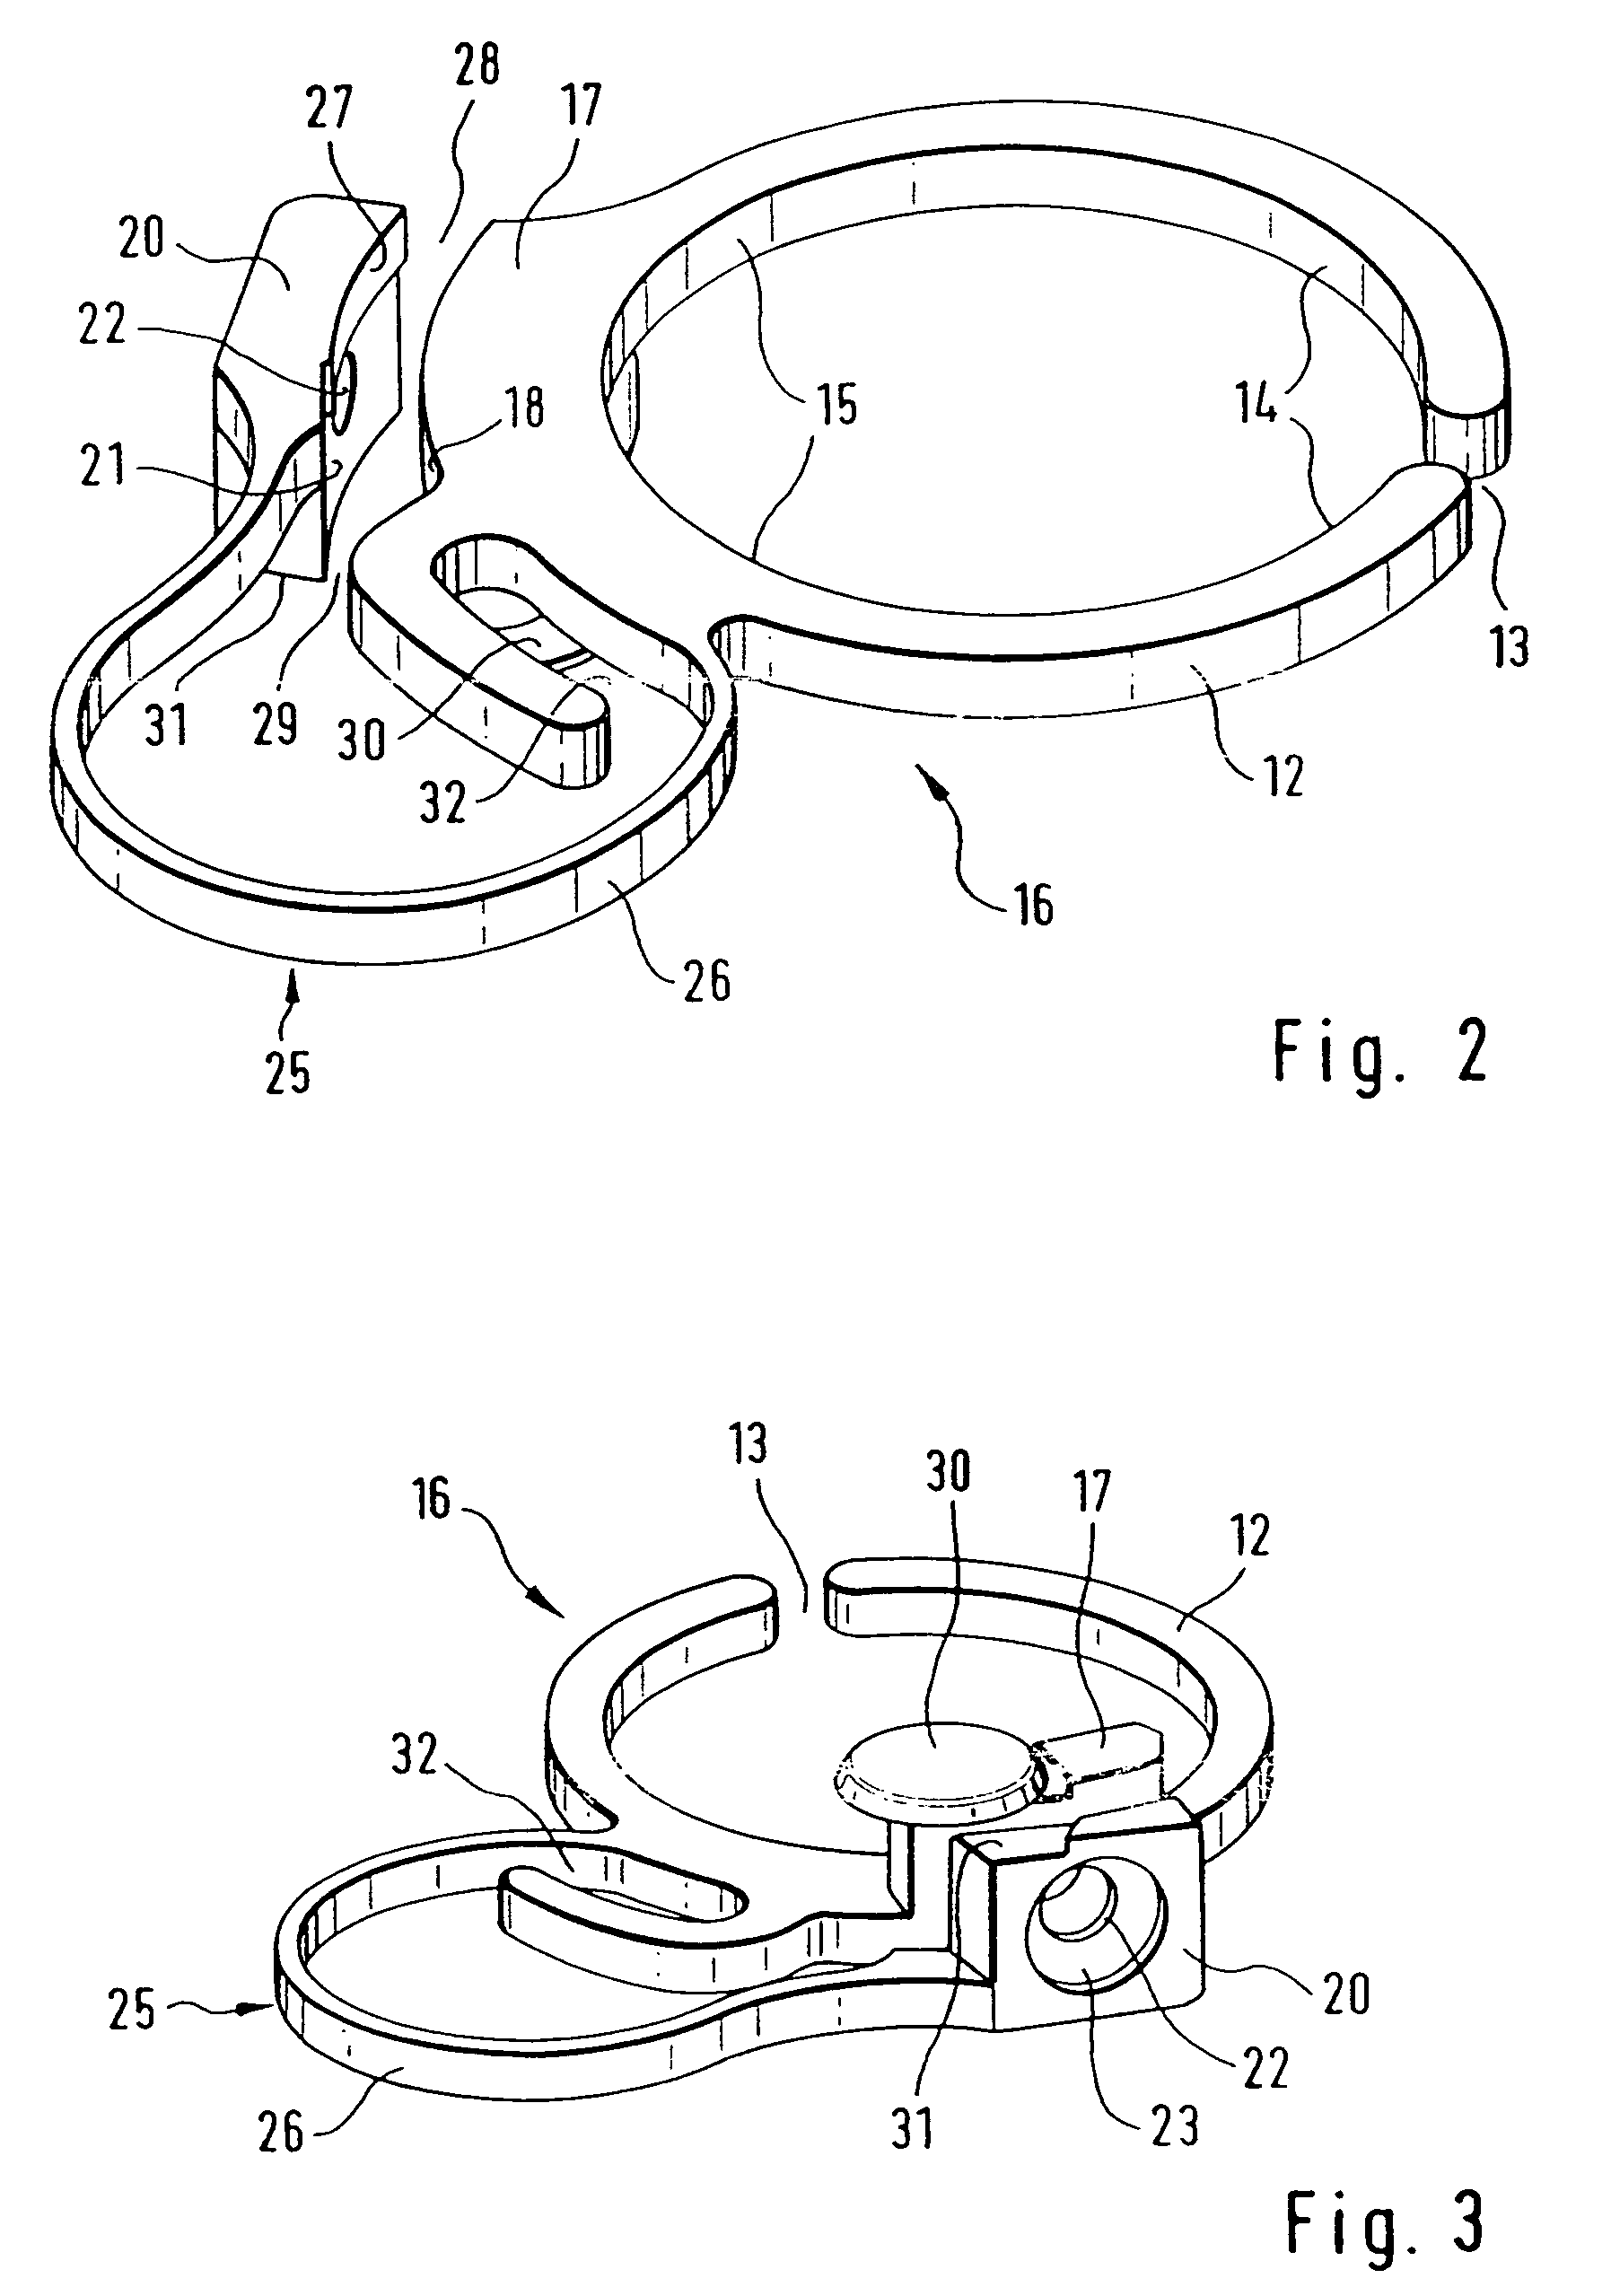 Oscillating system for mechanical timepiece